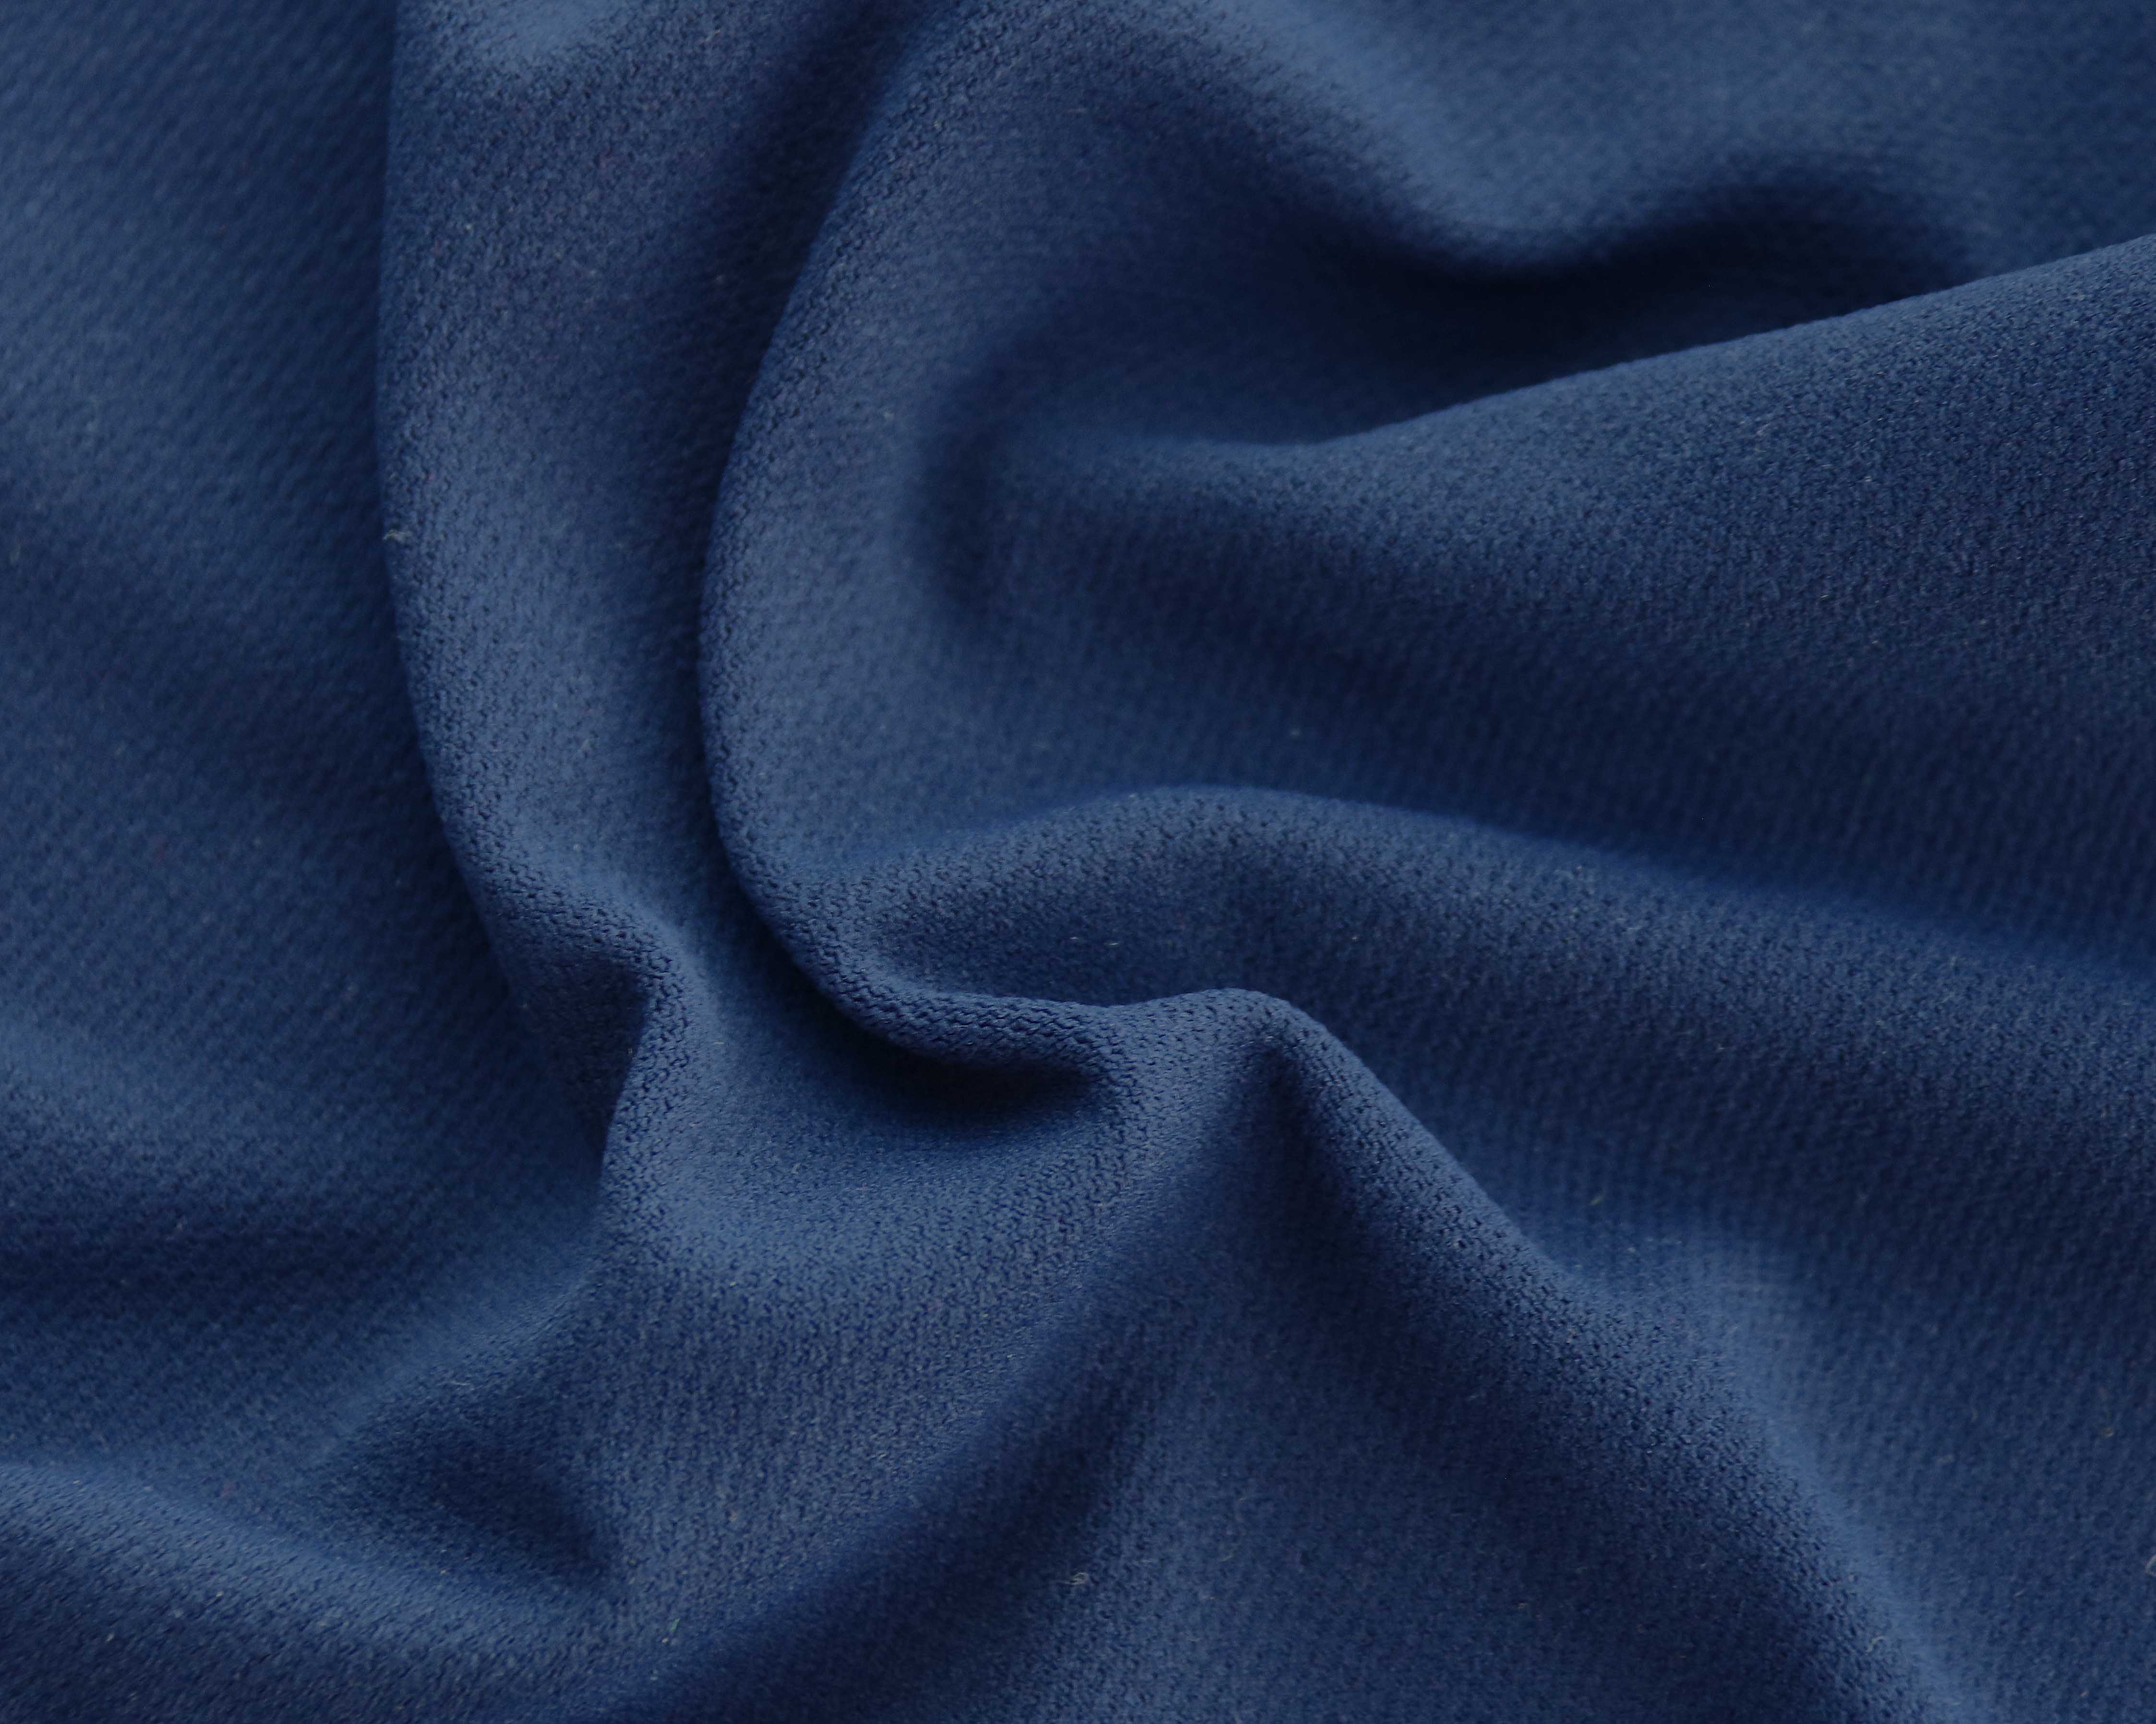 Rigid tricot fabric with dull appearance | KARL MAYER